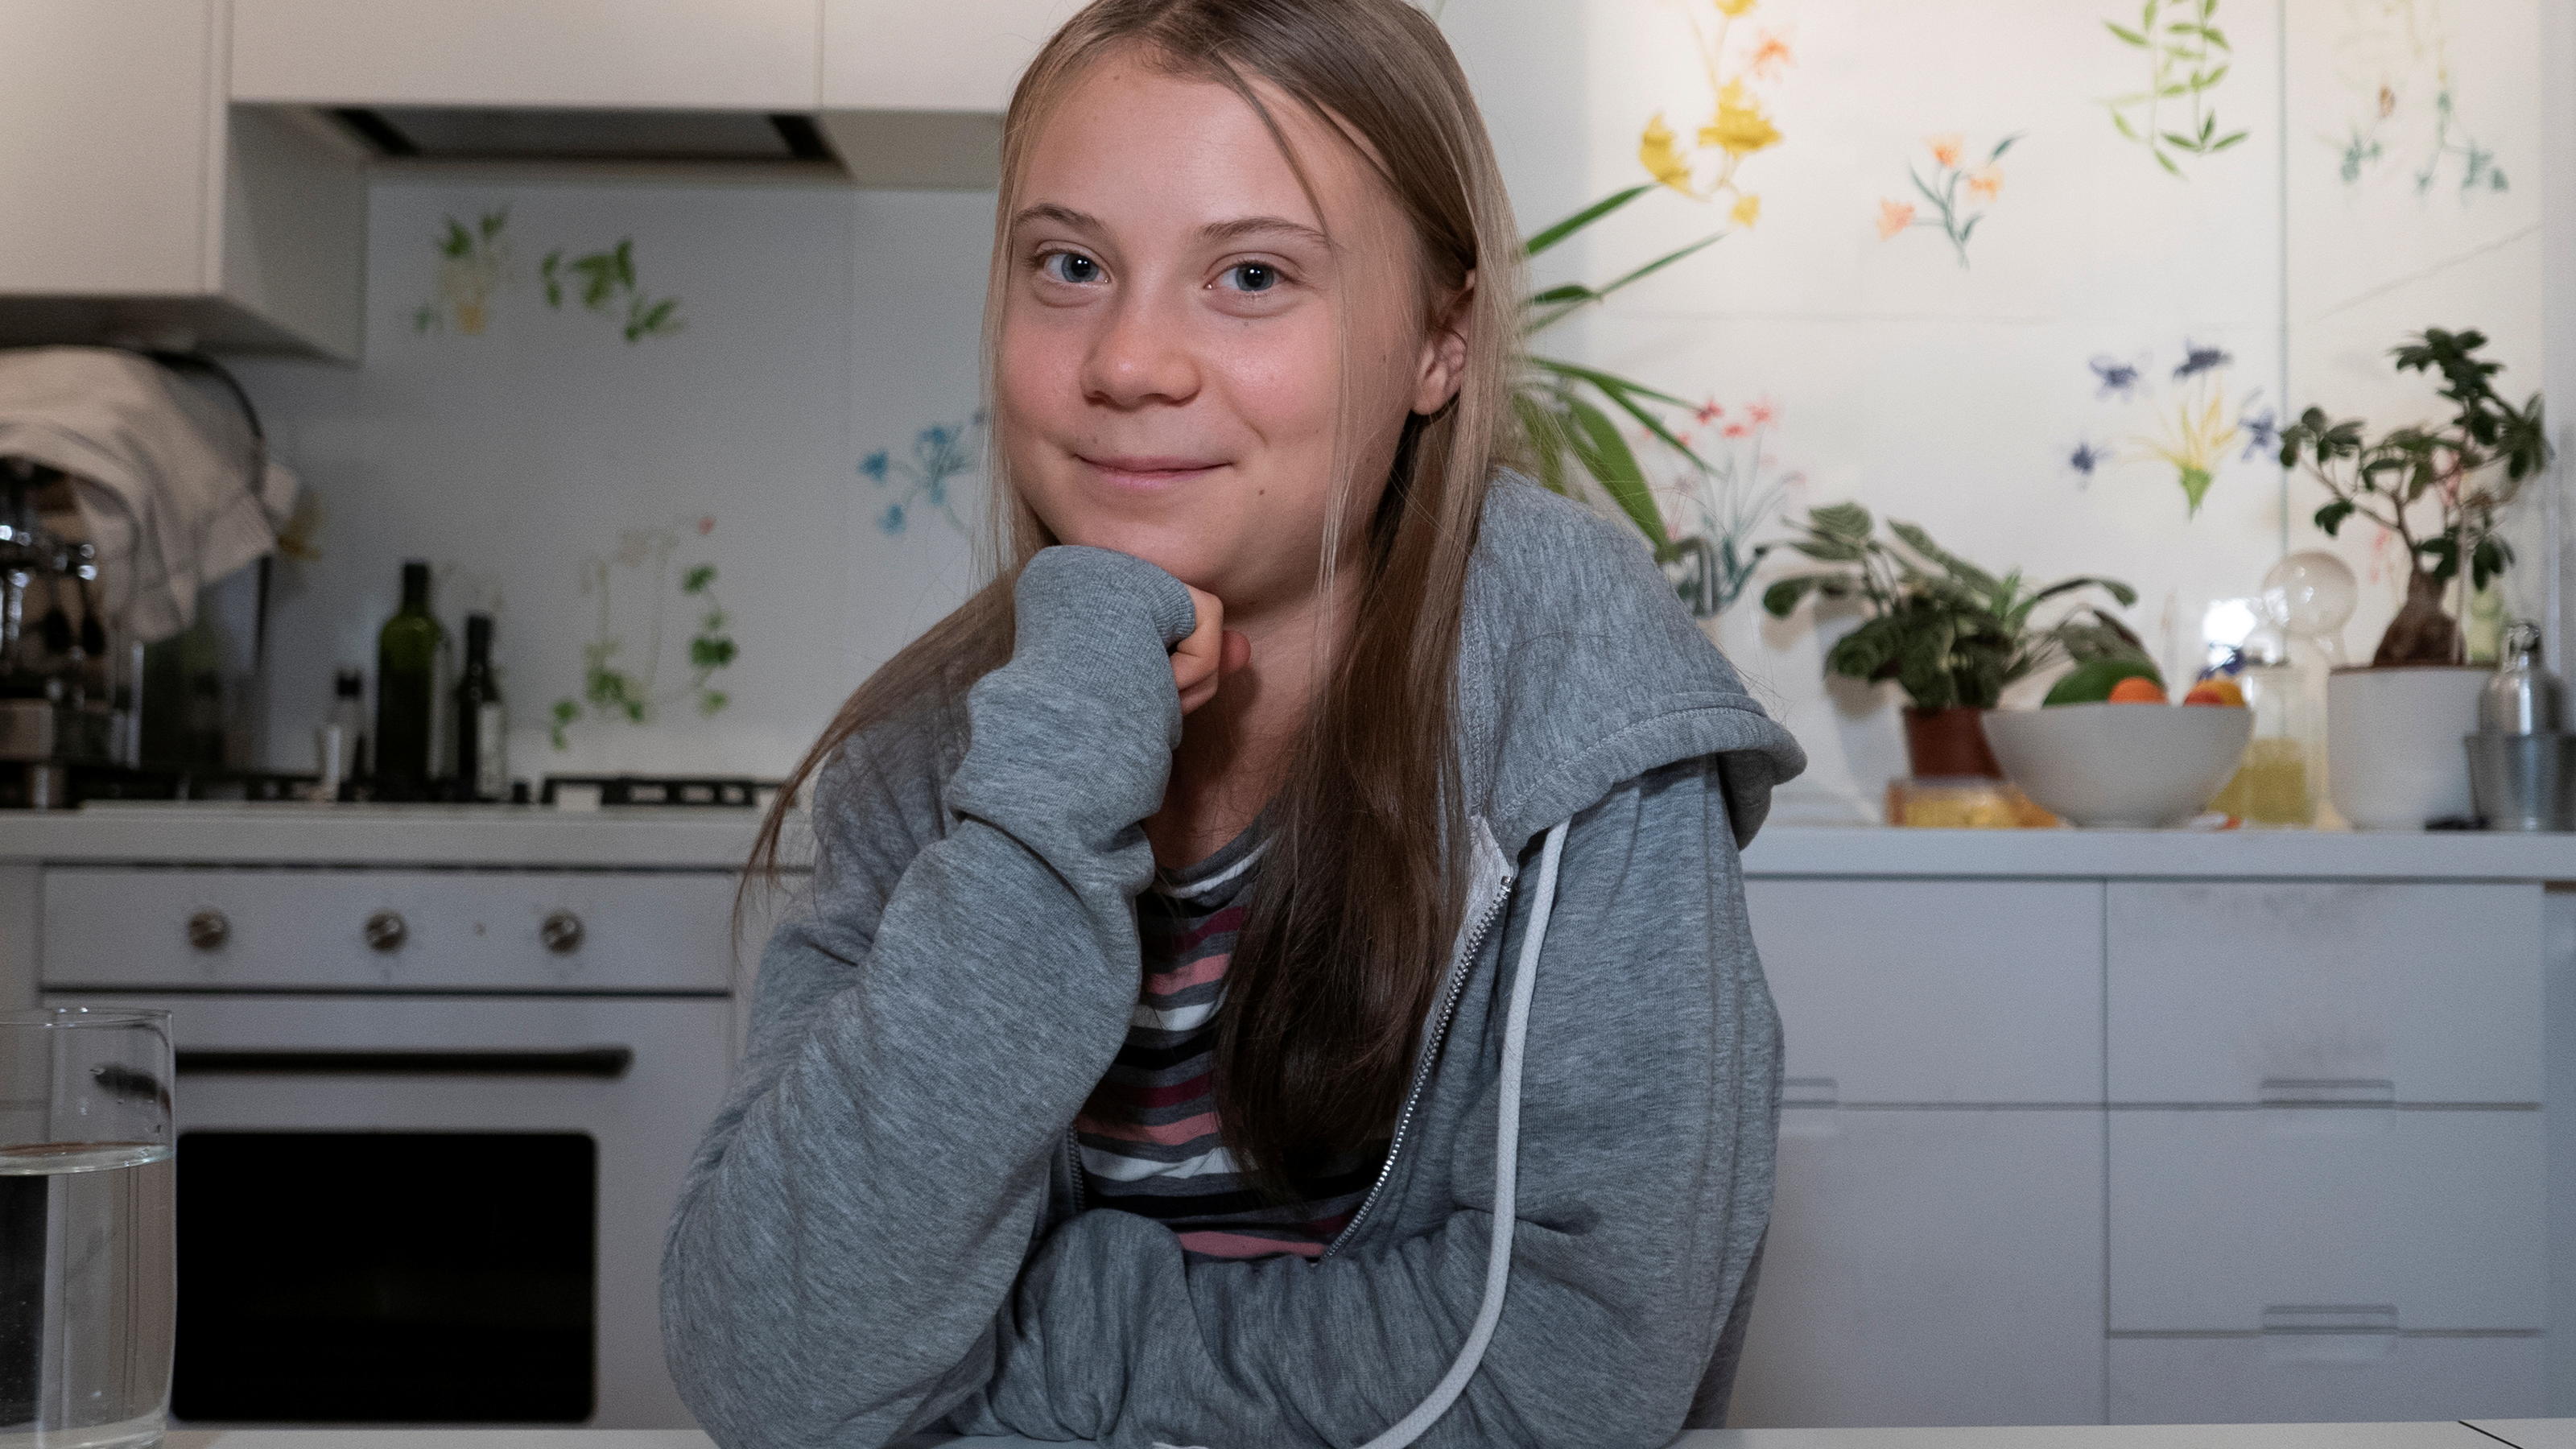 Climate activist Greta Thunberg poses during interview in her home in Stockholm, Sweden, October 7, 2021. REUTERS/Philip O'Connor